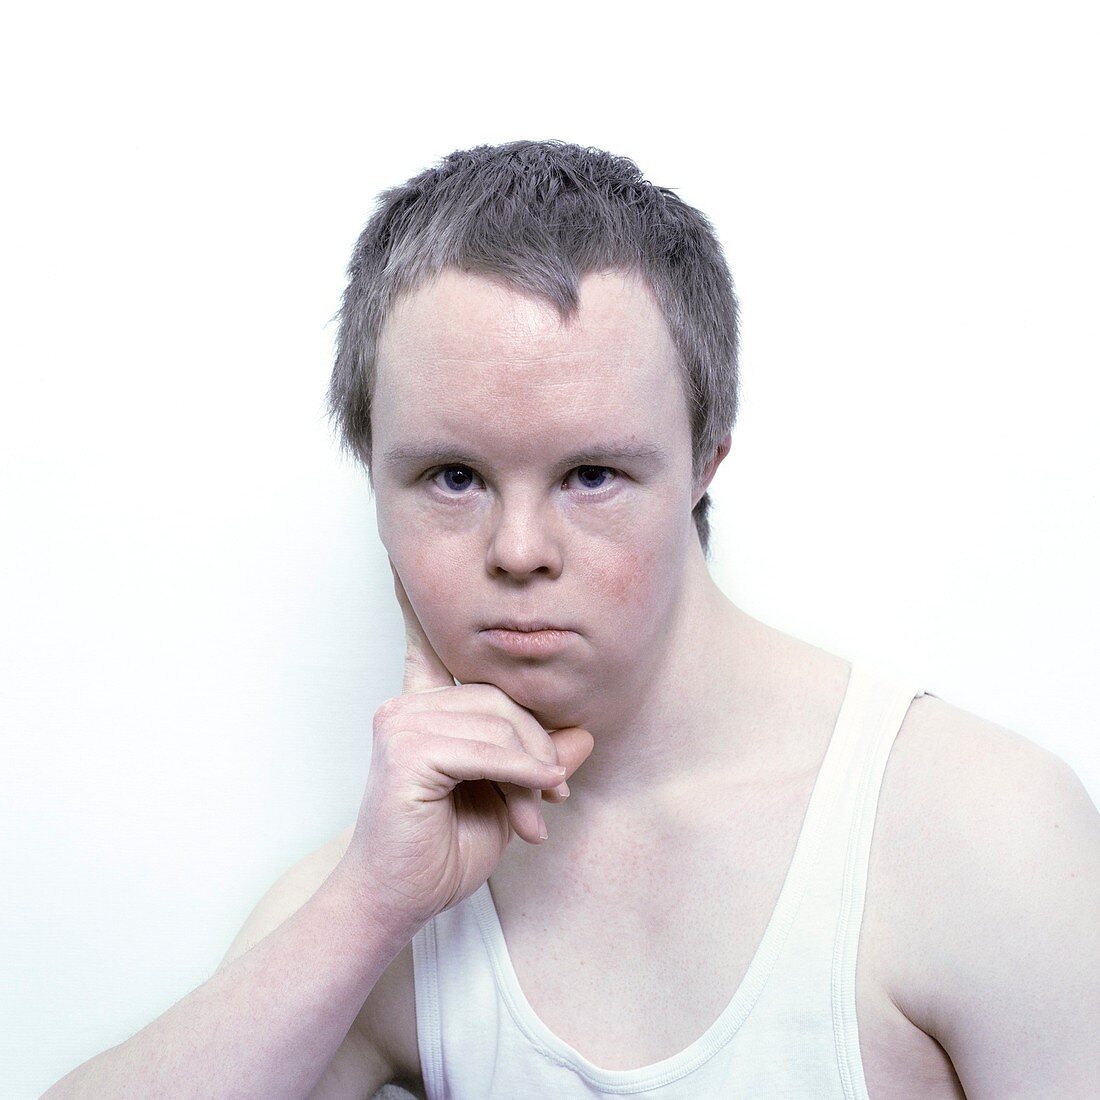 Face of a man with Down's syndrome